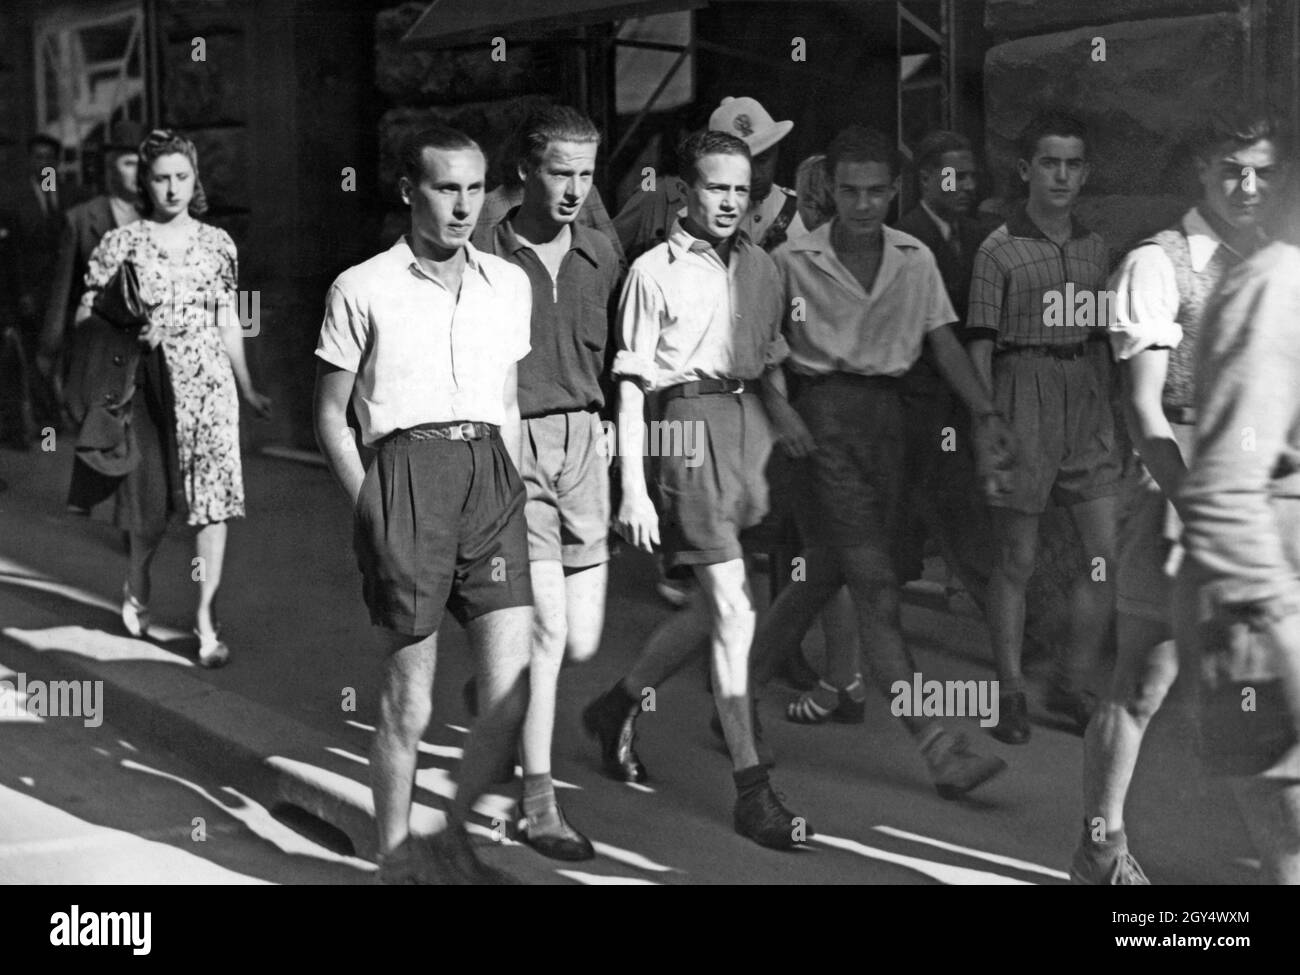 In 1940, a new fashion was given for the Italian youth: non-essential  clothes such as ties were no longer to be worn. Only short socks were to be  worn and the boys